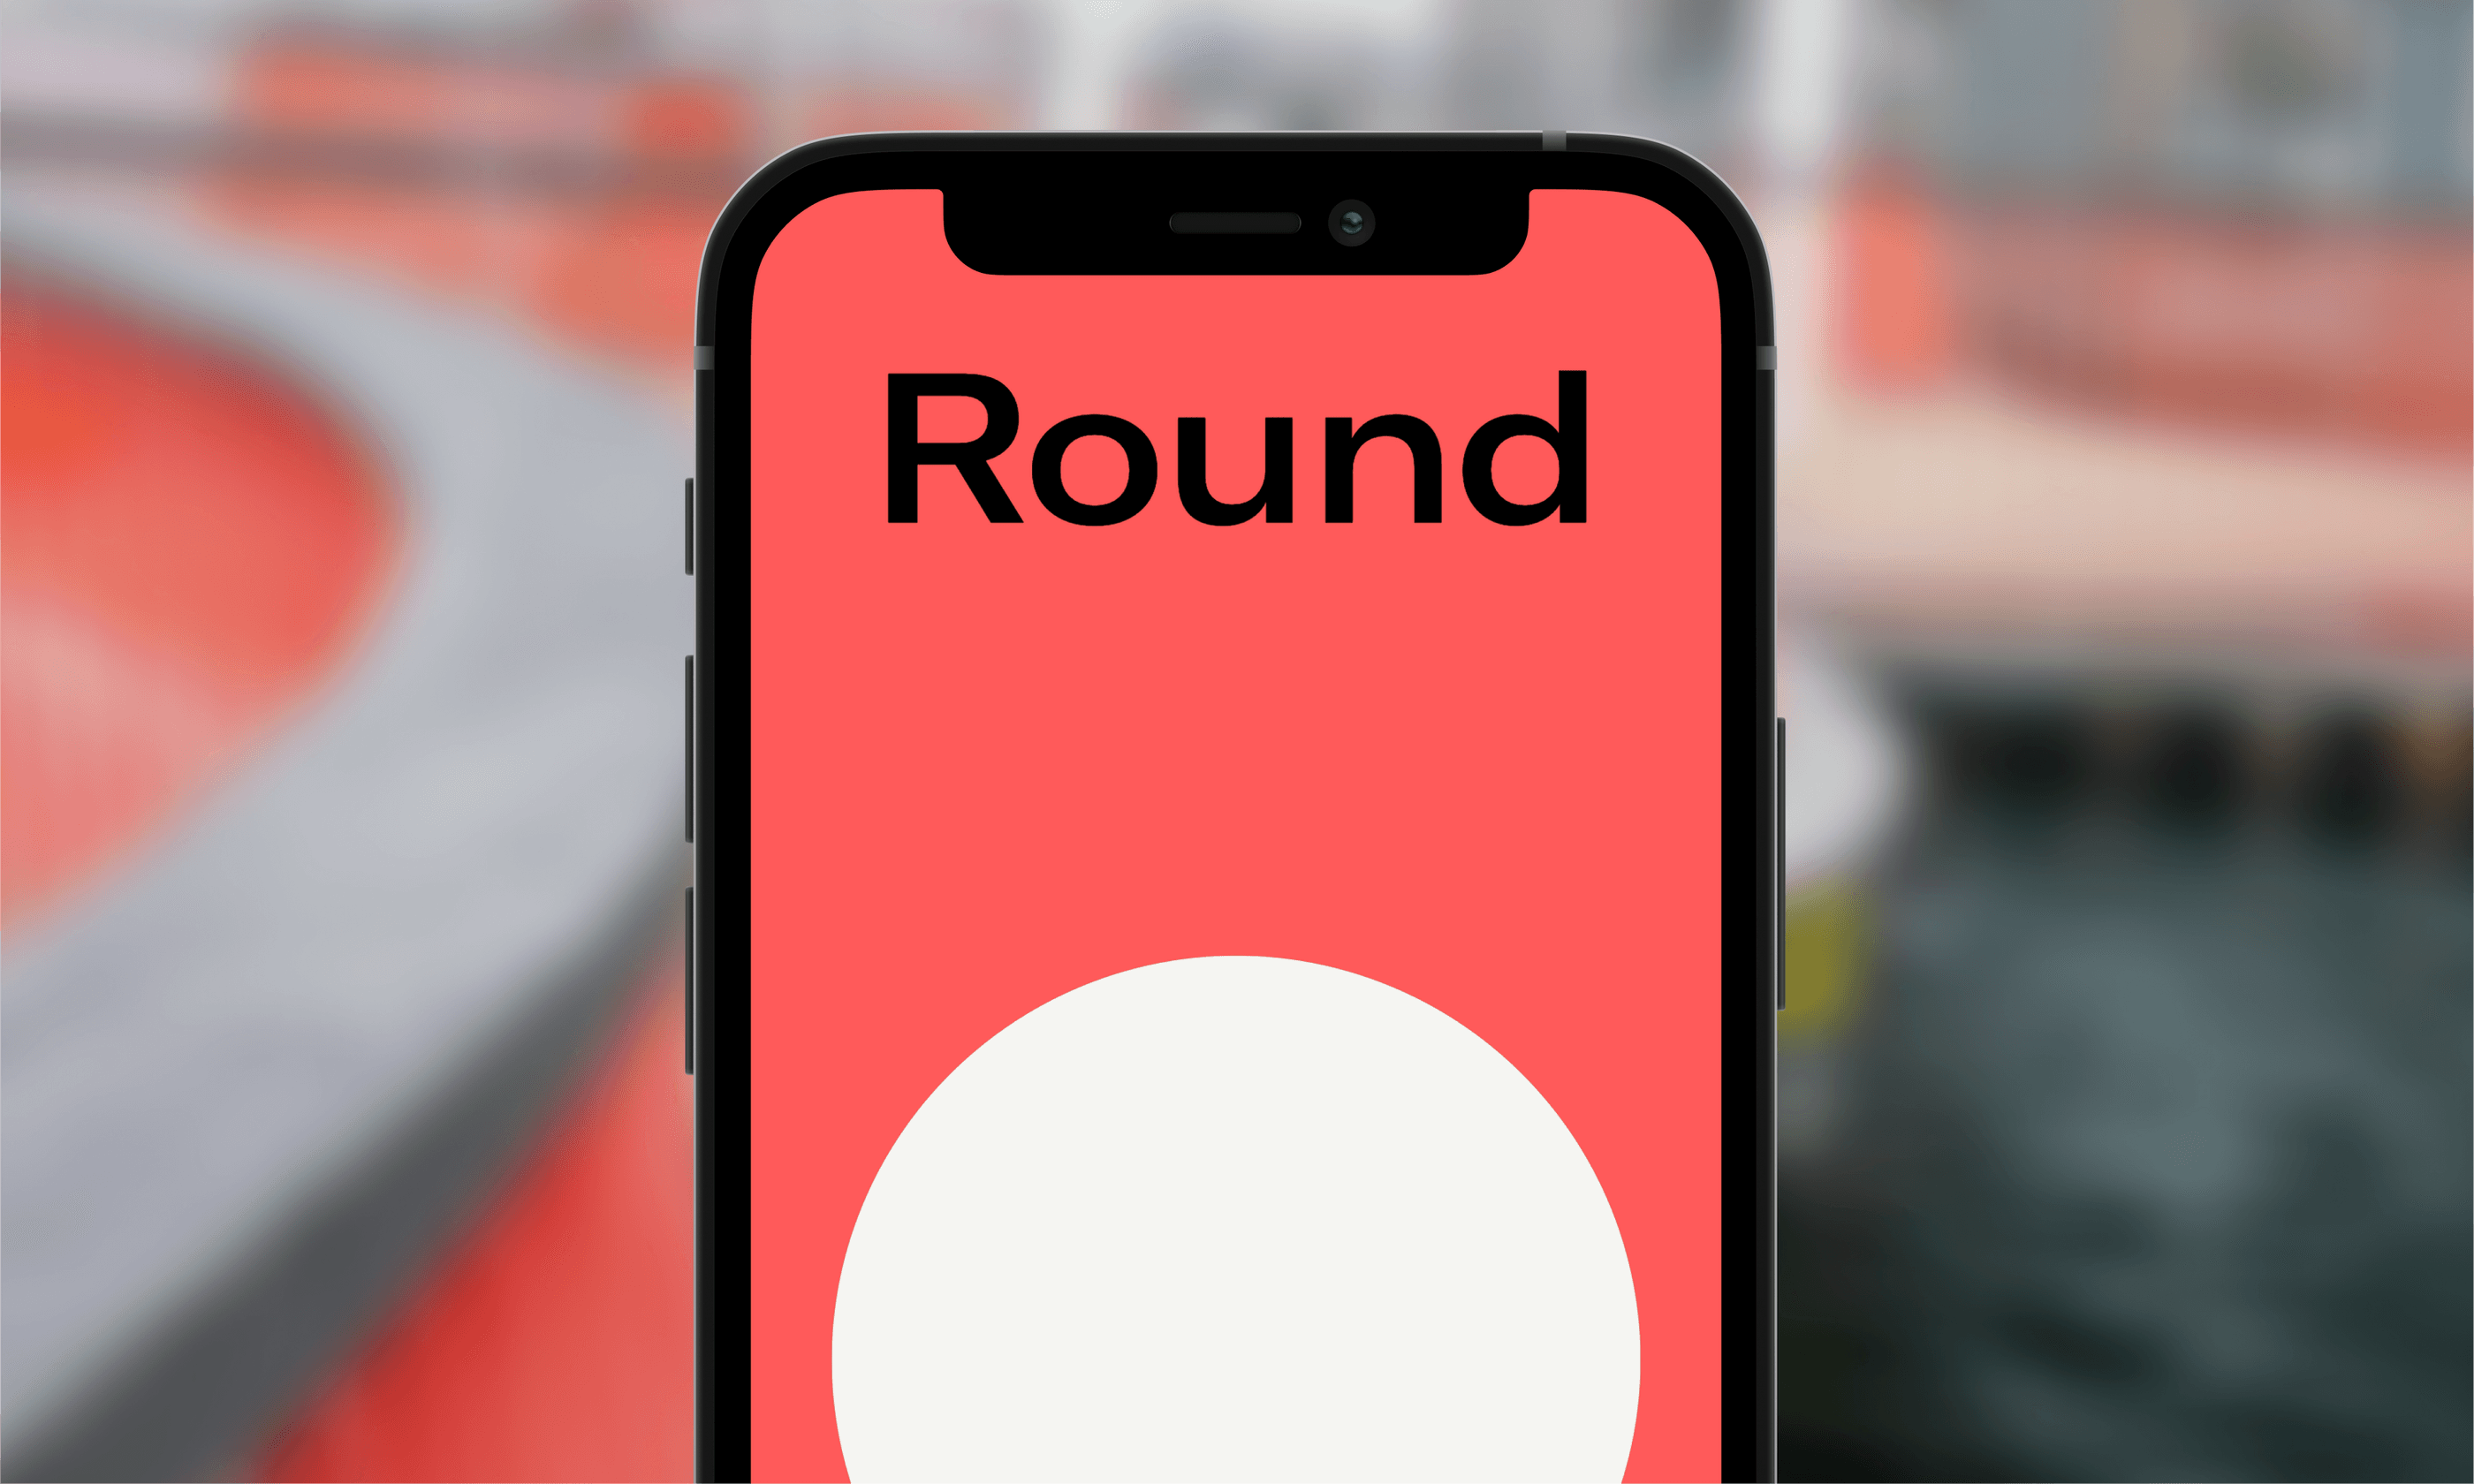 First screen of the round website